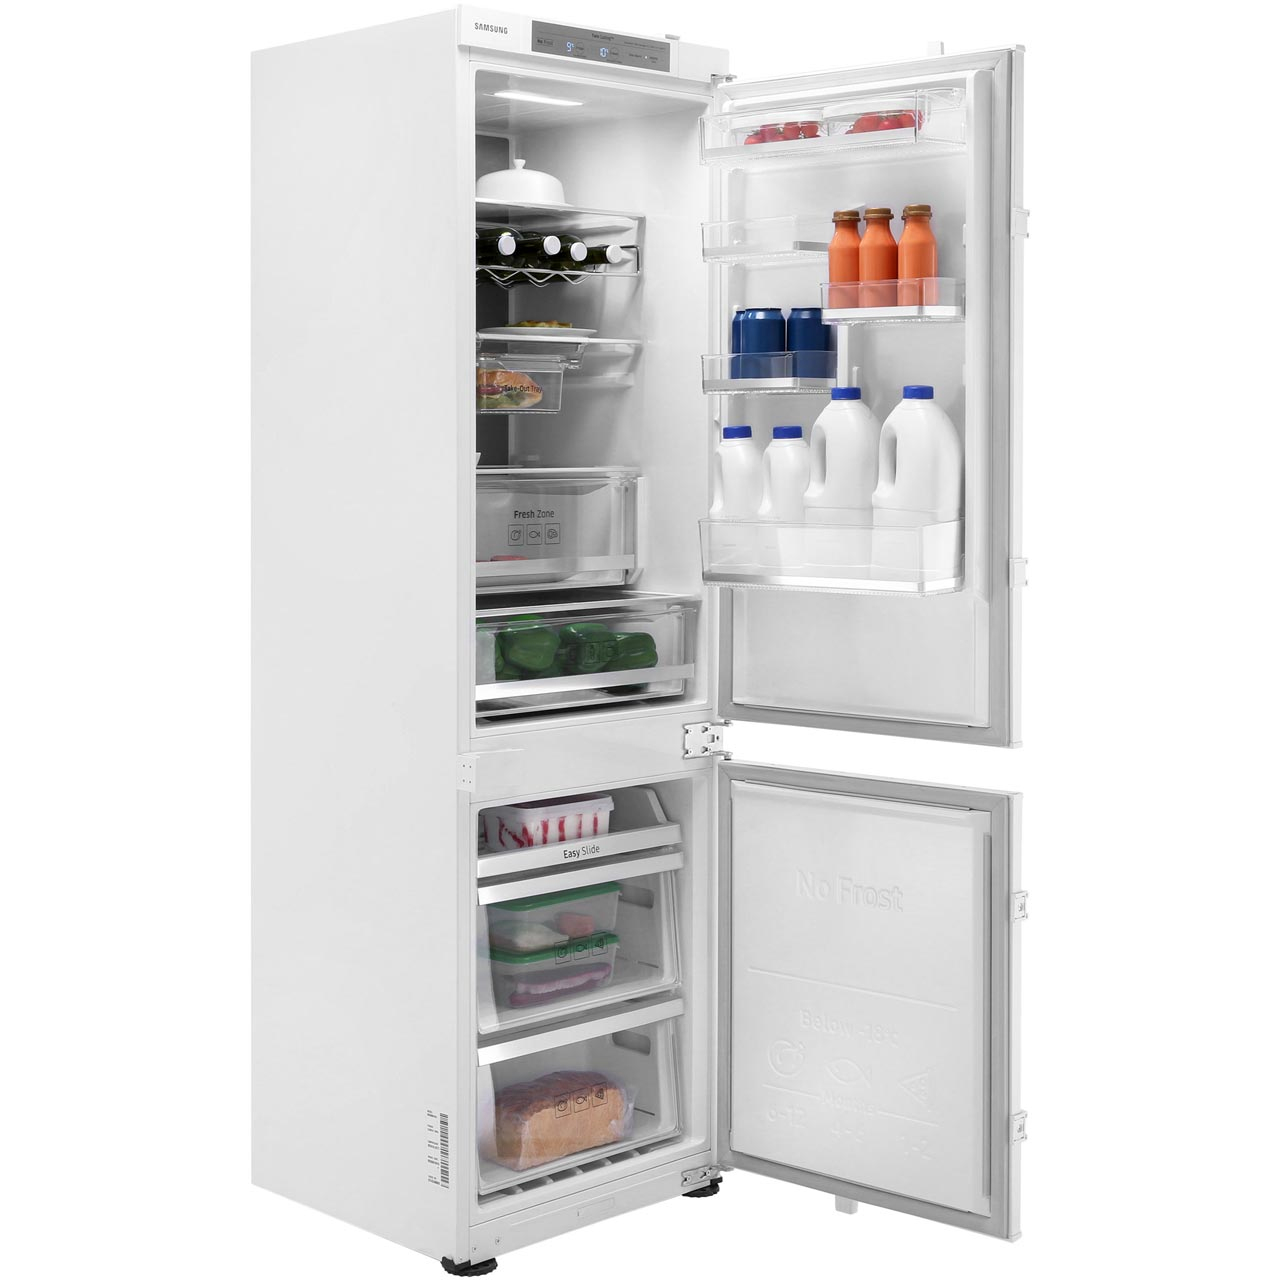 Samsung Chef Collection Brb260087Ww Integrated 7030 Frost concernant Samsung Fridge 